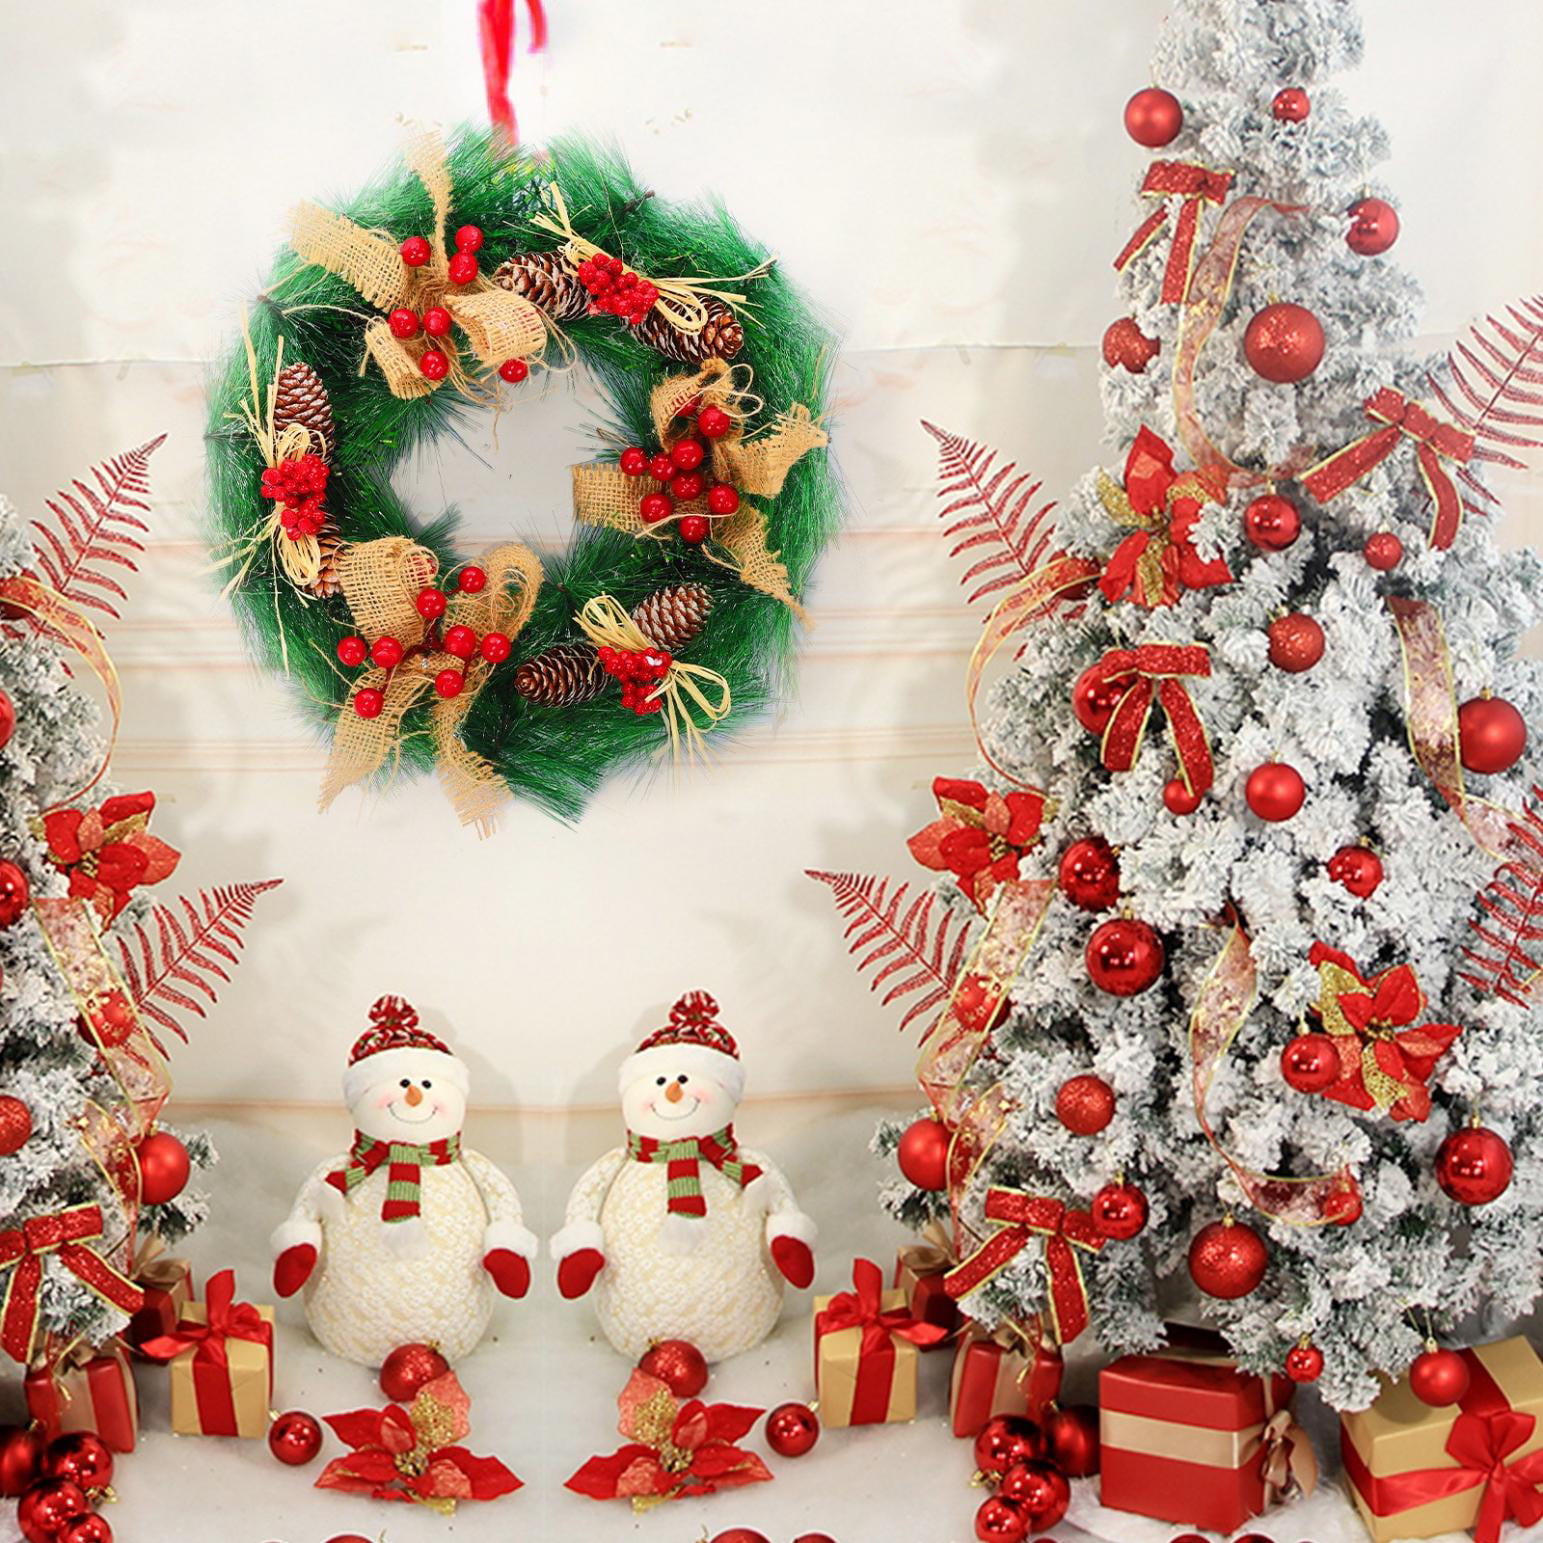 SINGARE Christmas Wreaths 12 Inch Christmas Front Door Hanging Artificial Wreath Garland with Balls Bells Gift Box Bow Star for Christmas Decorations Door Window Indoors Outdoors Decor